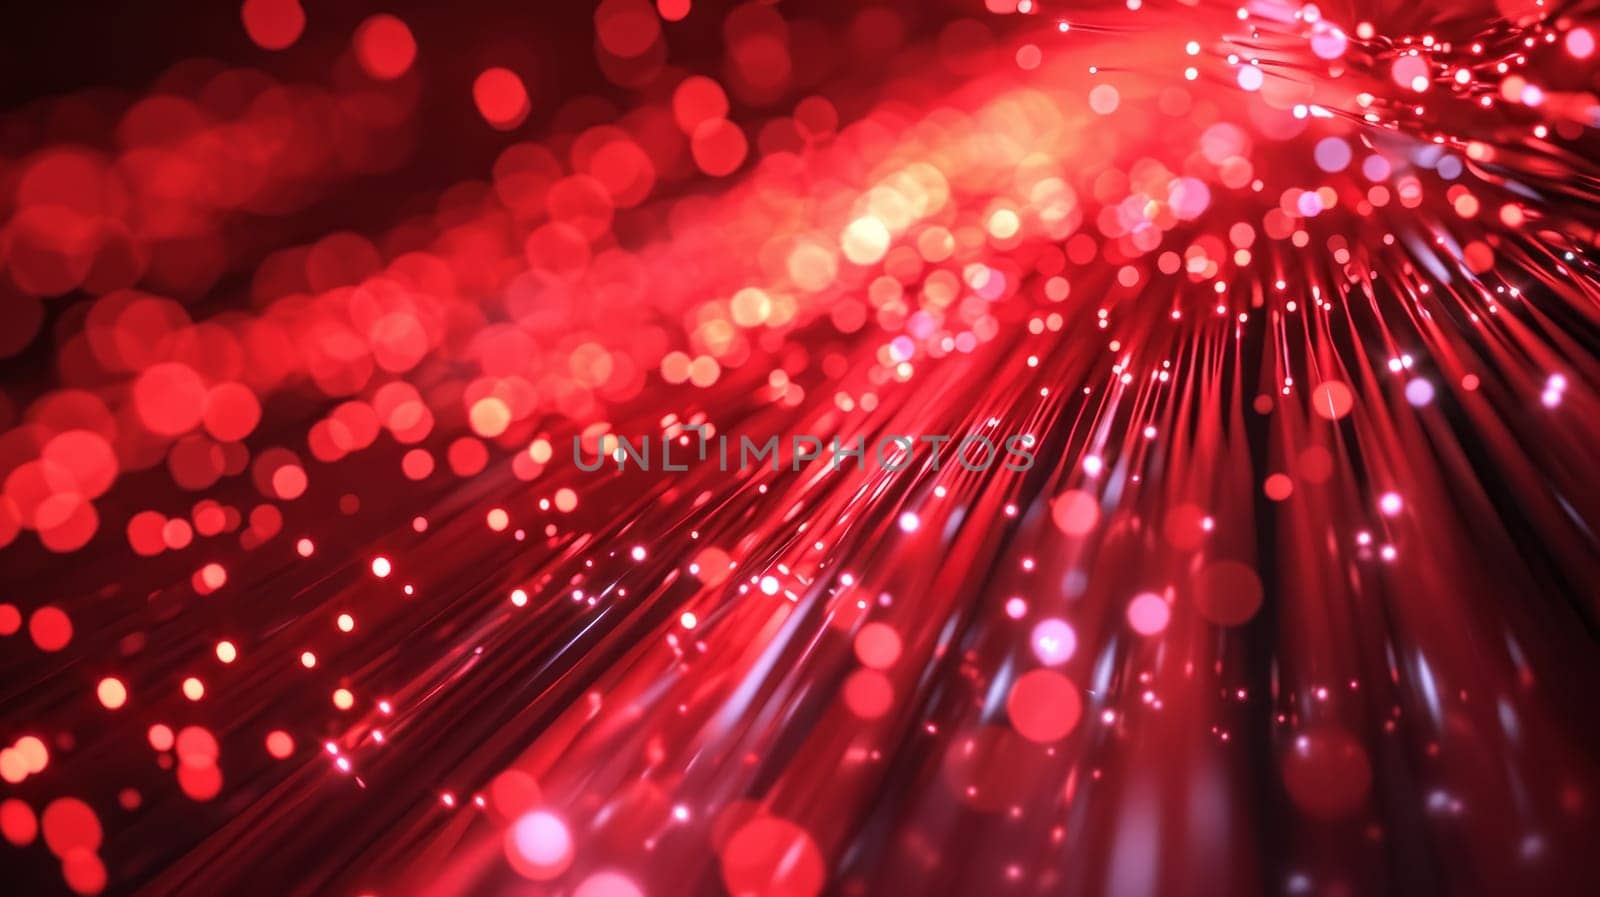 Futuristic technology innovation red 3D background. AI by but_photo